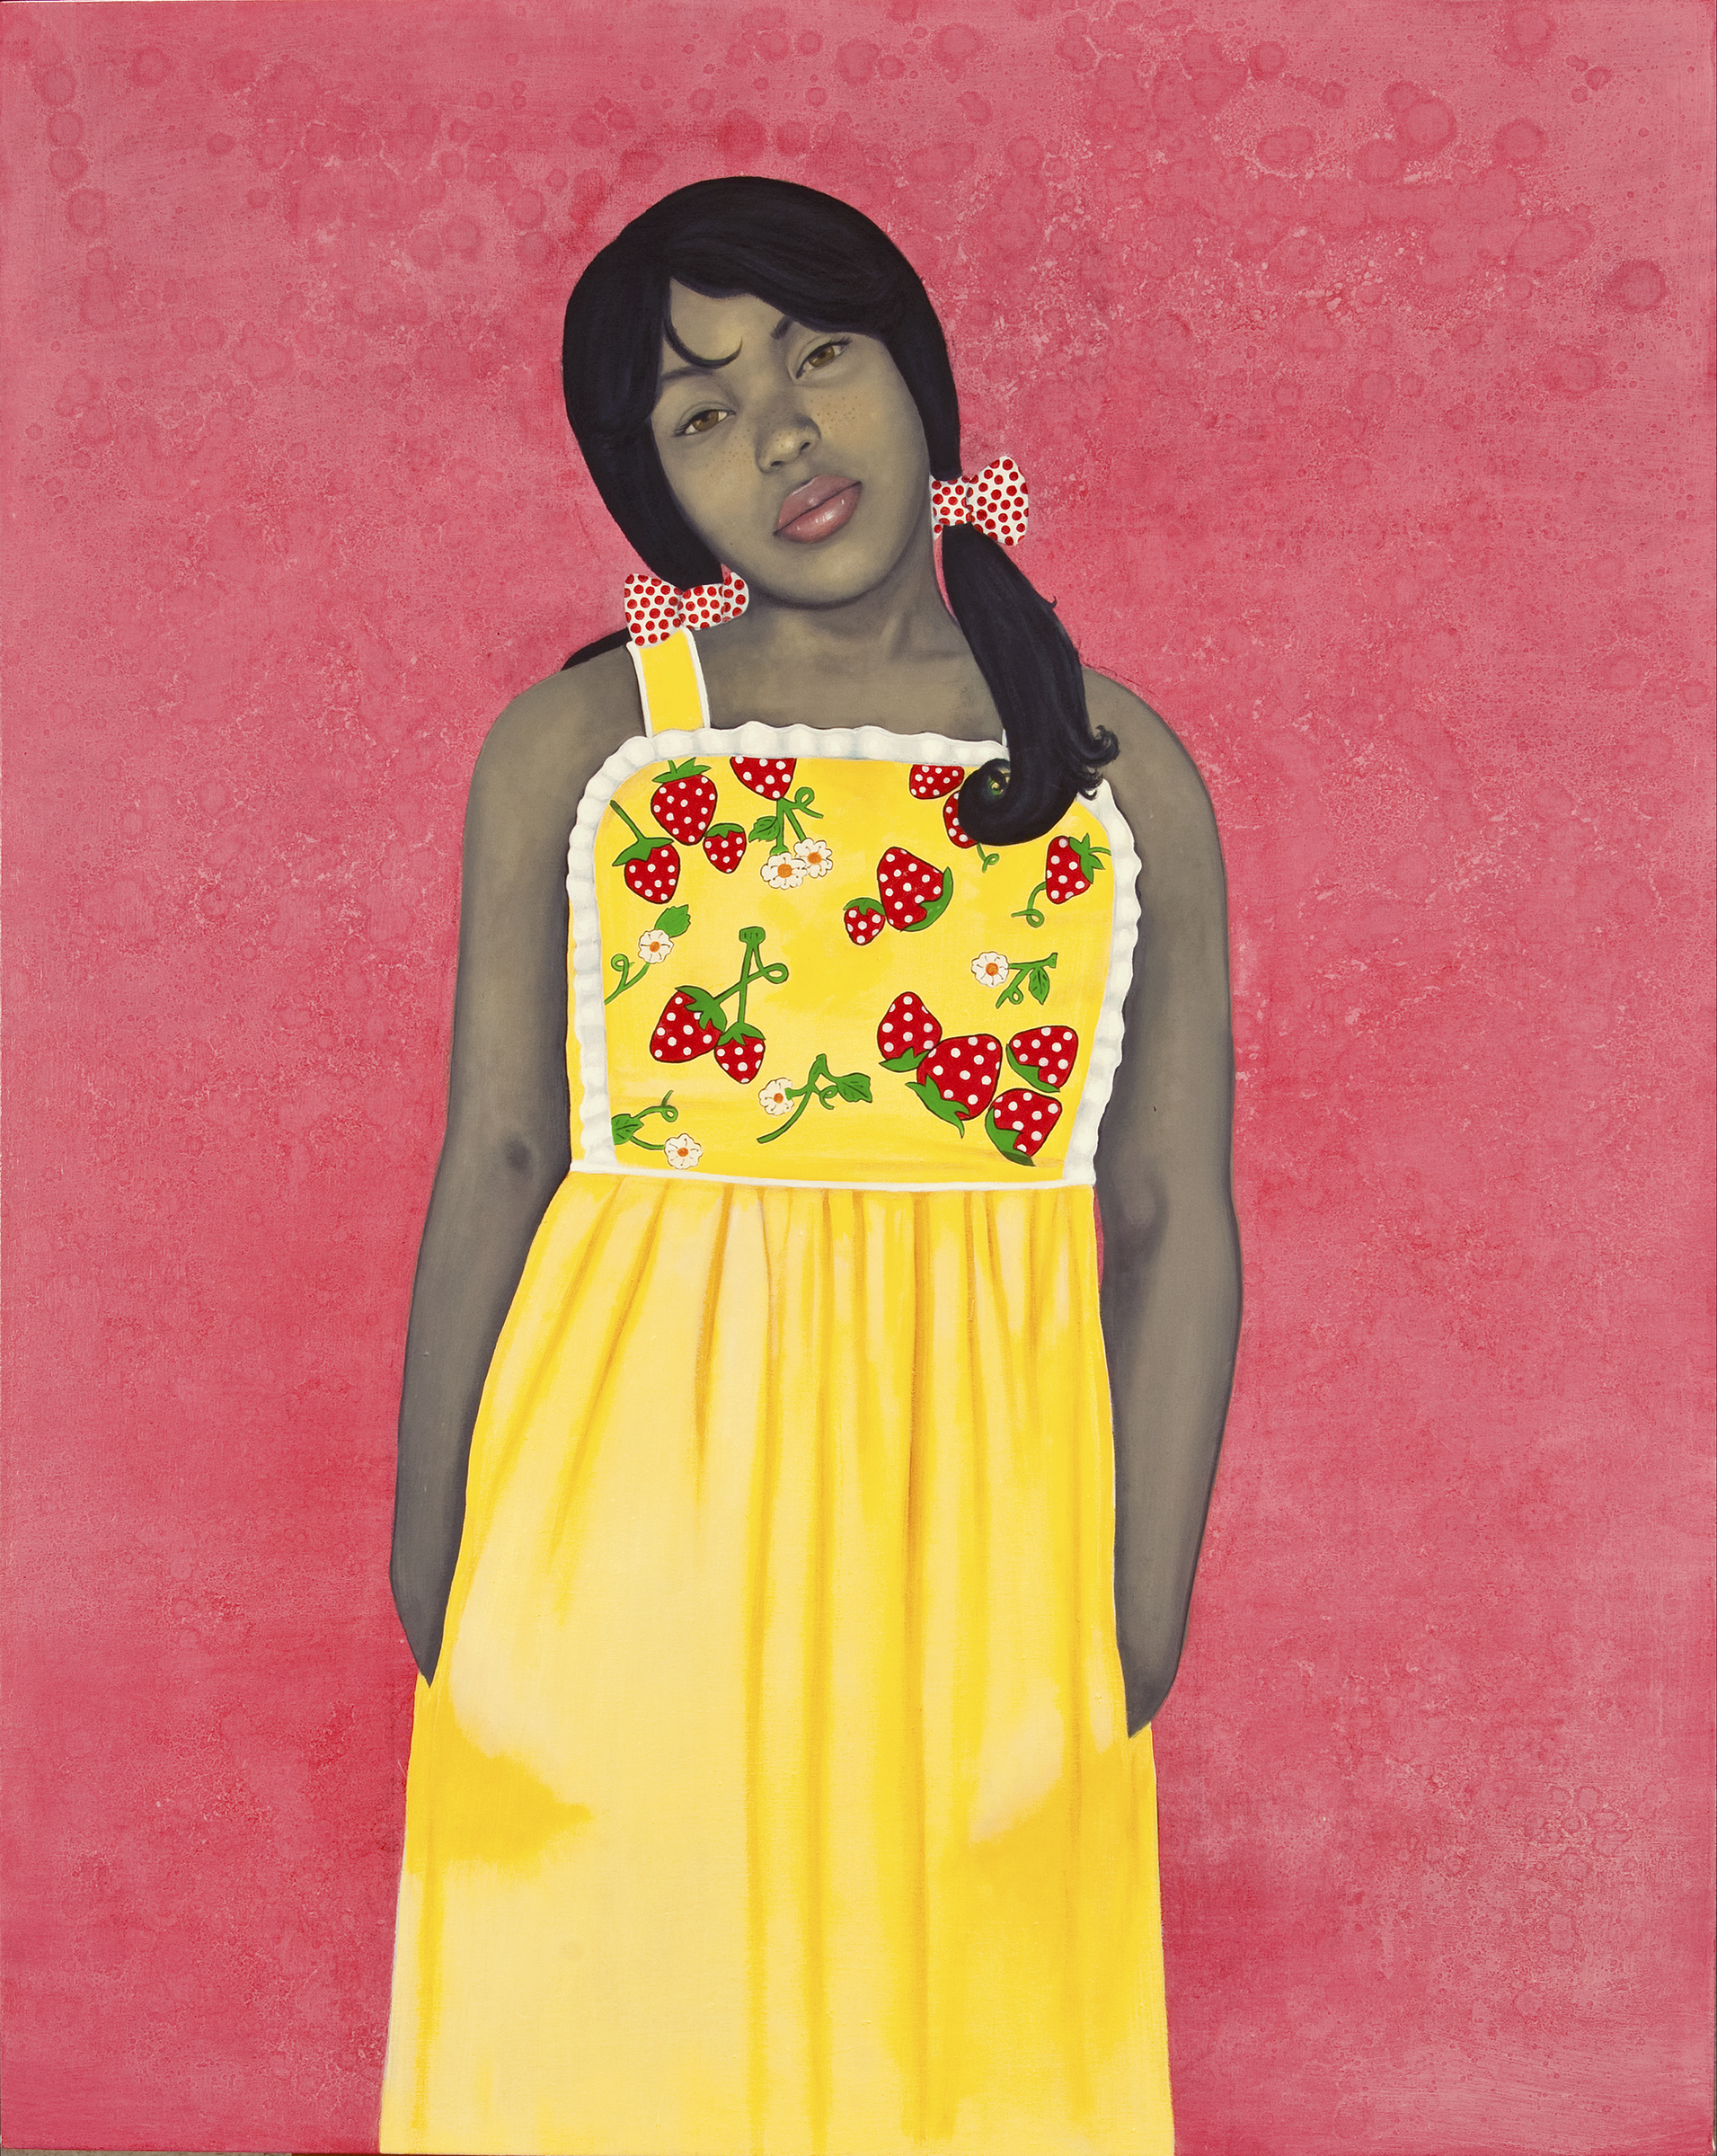 They call me Redbone but I’d rather be Strawberry Shortcake by Amy Sherald - 2009 - 54 x 43 in National Museum of Women in the Arts